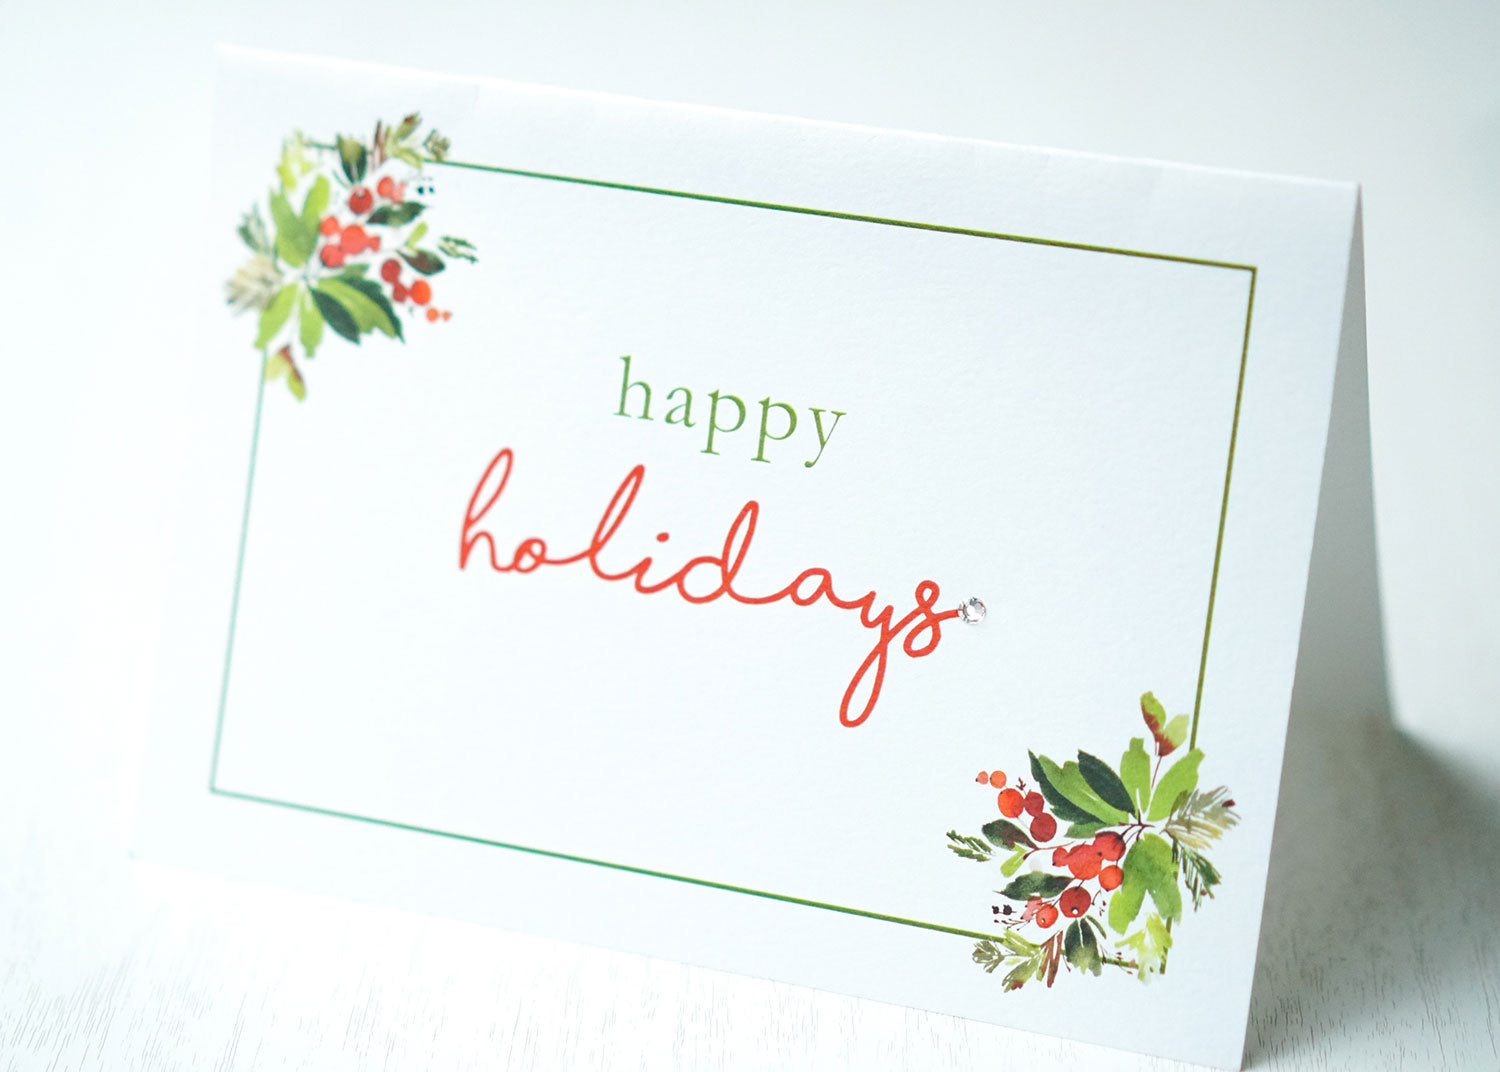 alt="This gorgeous Christmas card features a white pearlescent shimmer card stock, “Happy Holidays” or “Merry Christmas” printed sentiment in pretty script writing with a jewel detail and is framed by a green border, leaves and berries"